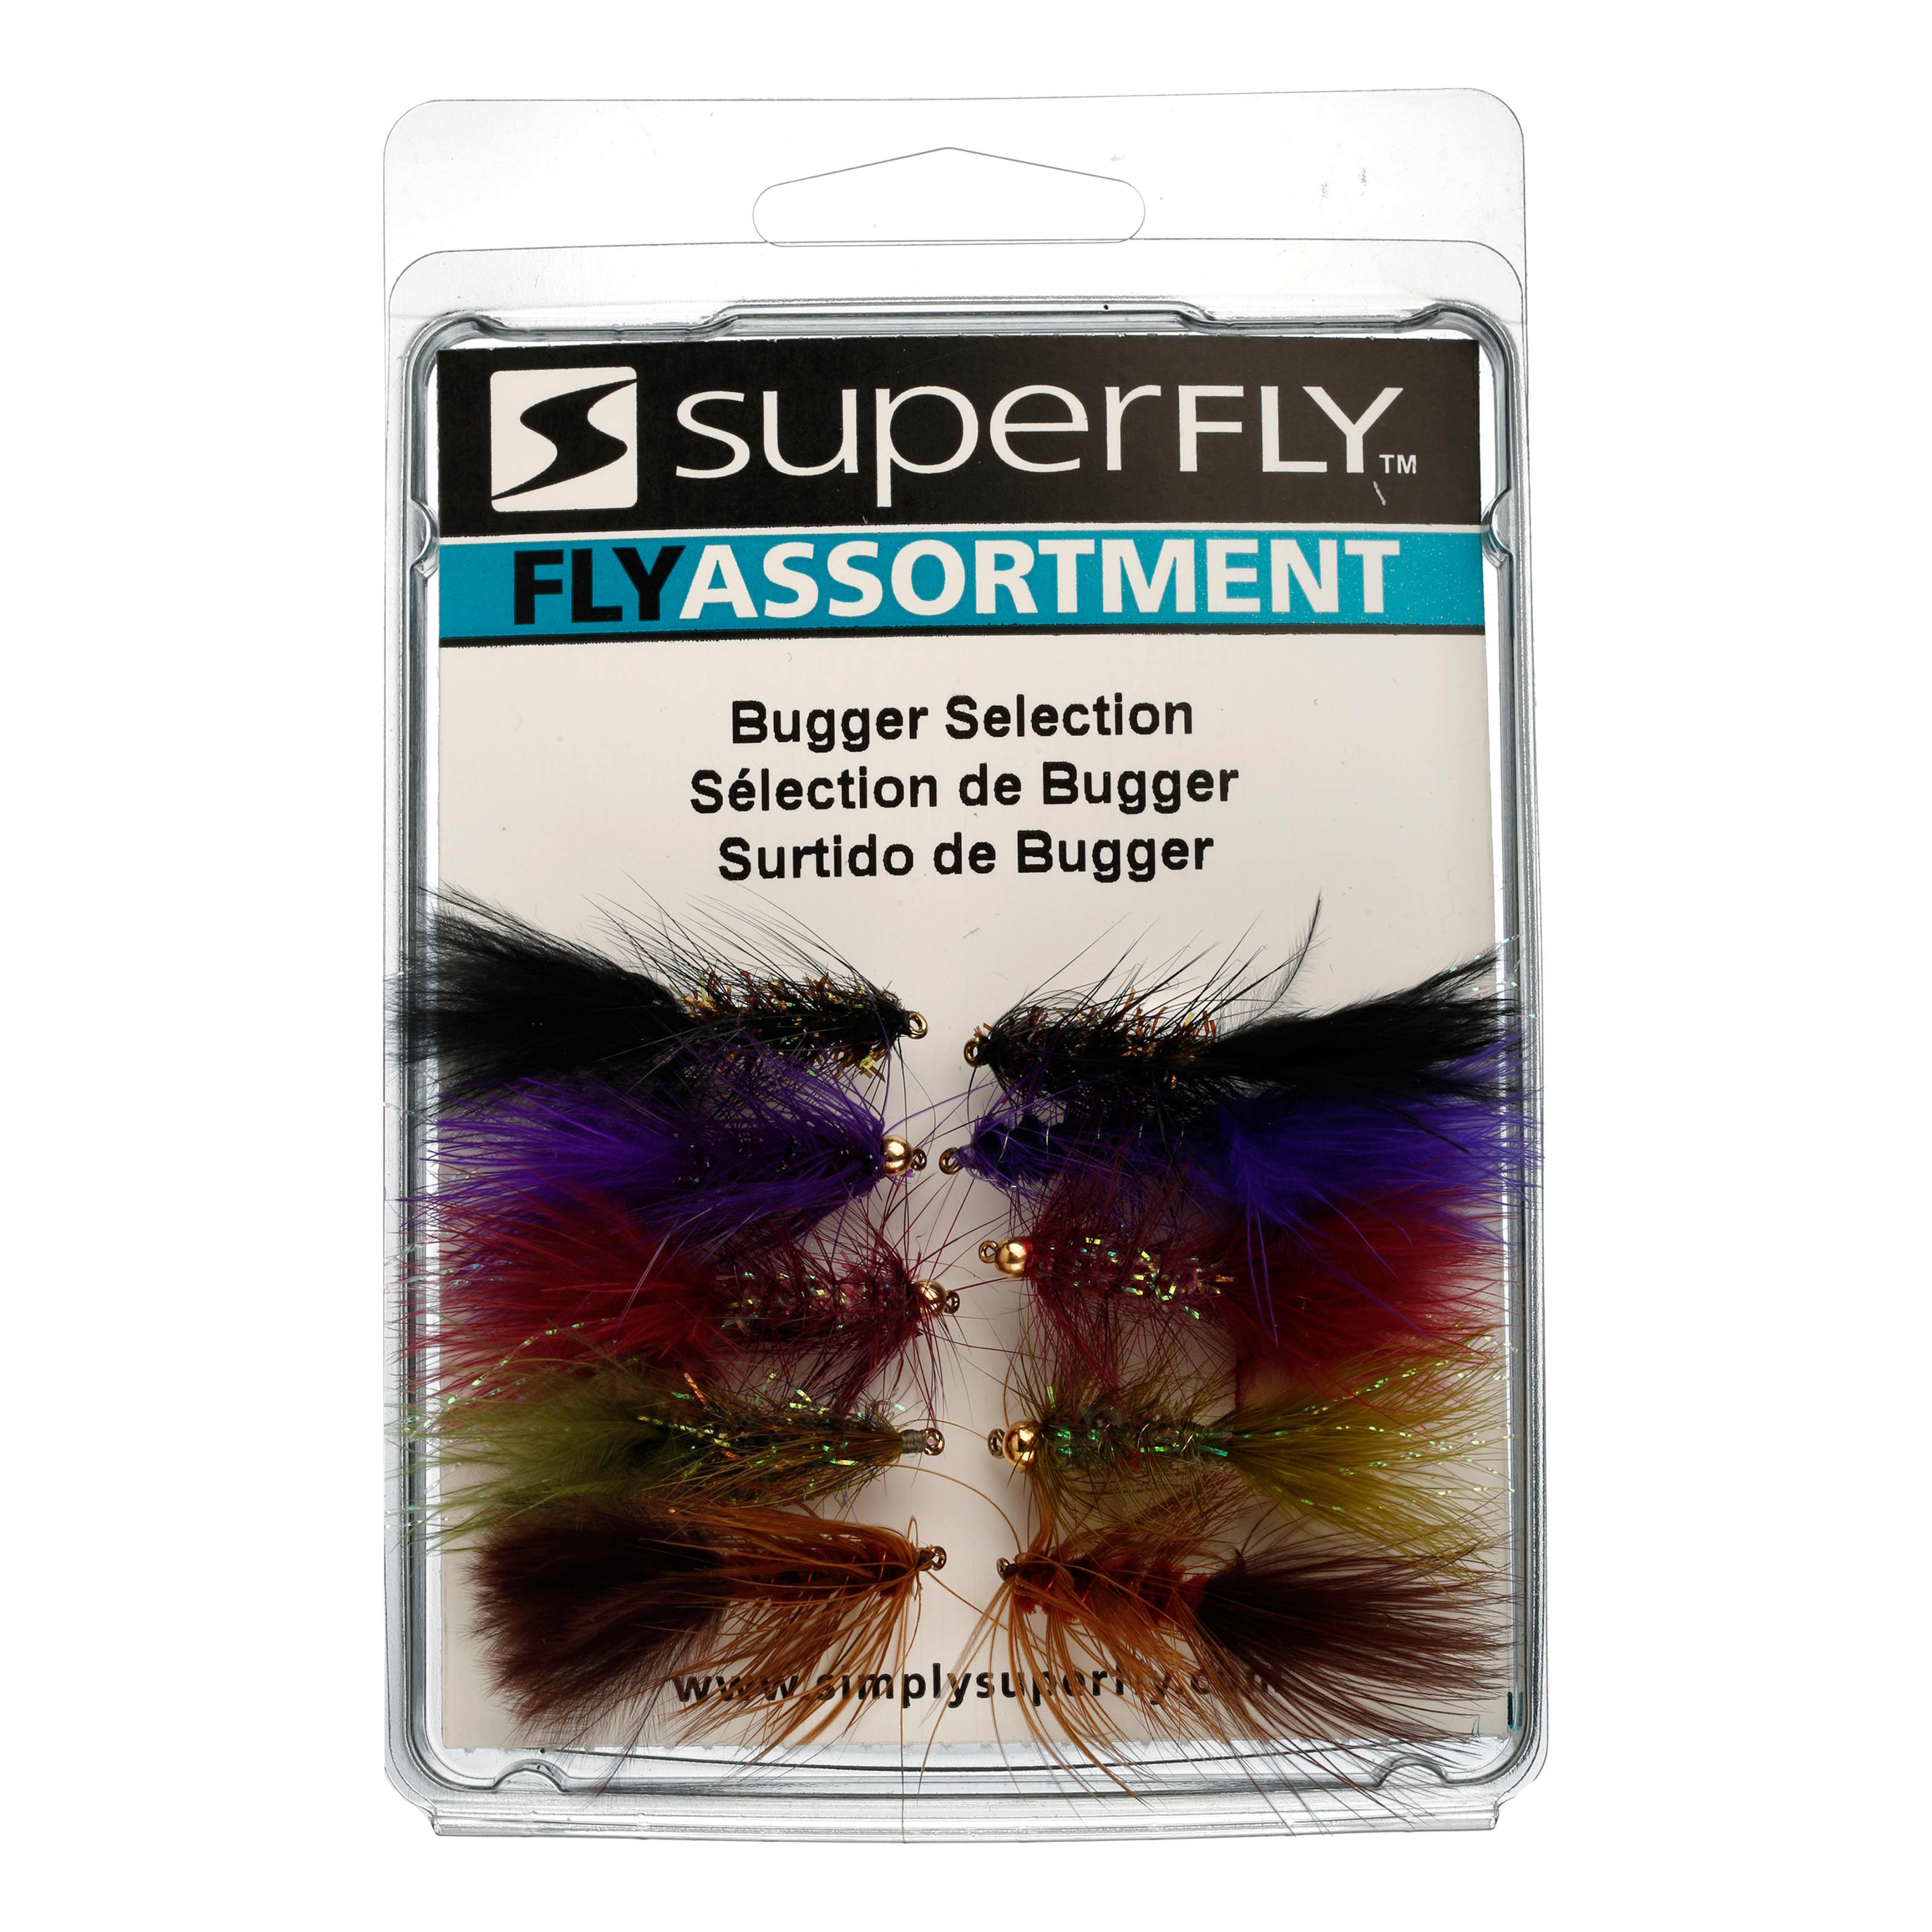 Superfly Premium Bugger Selection